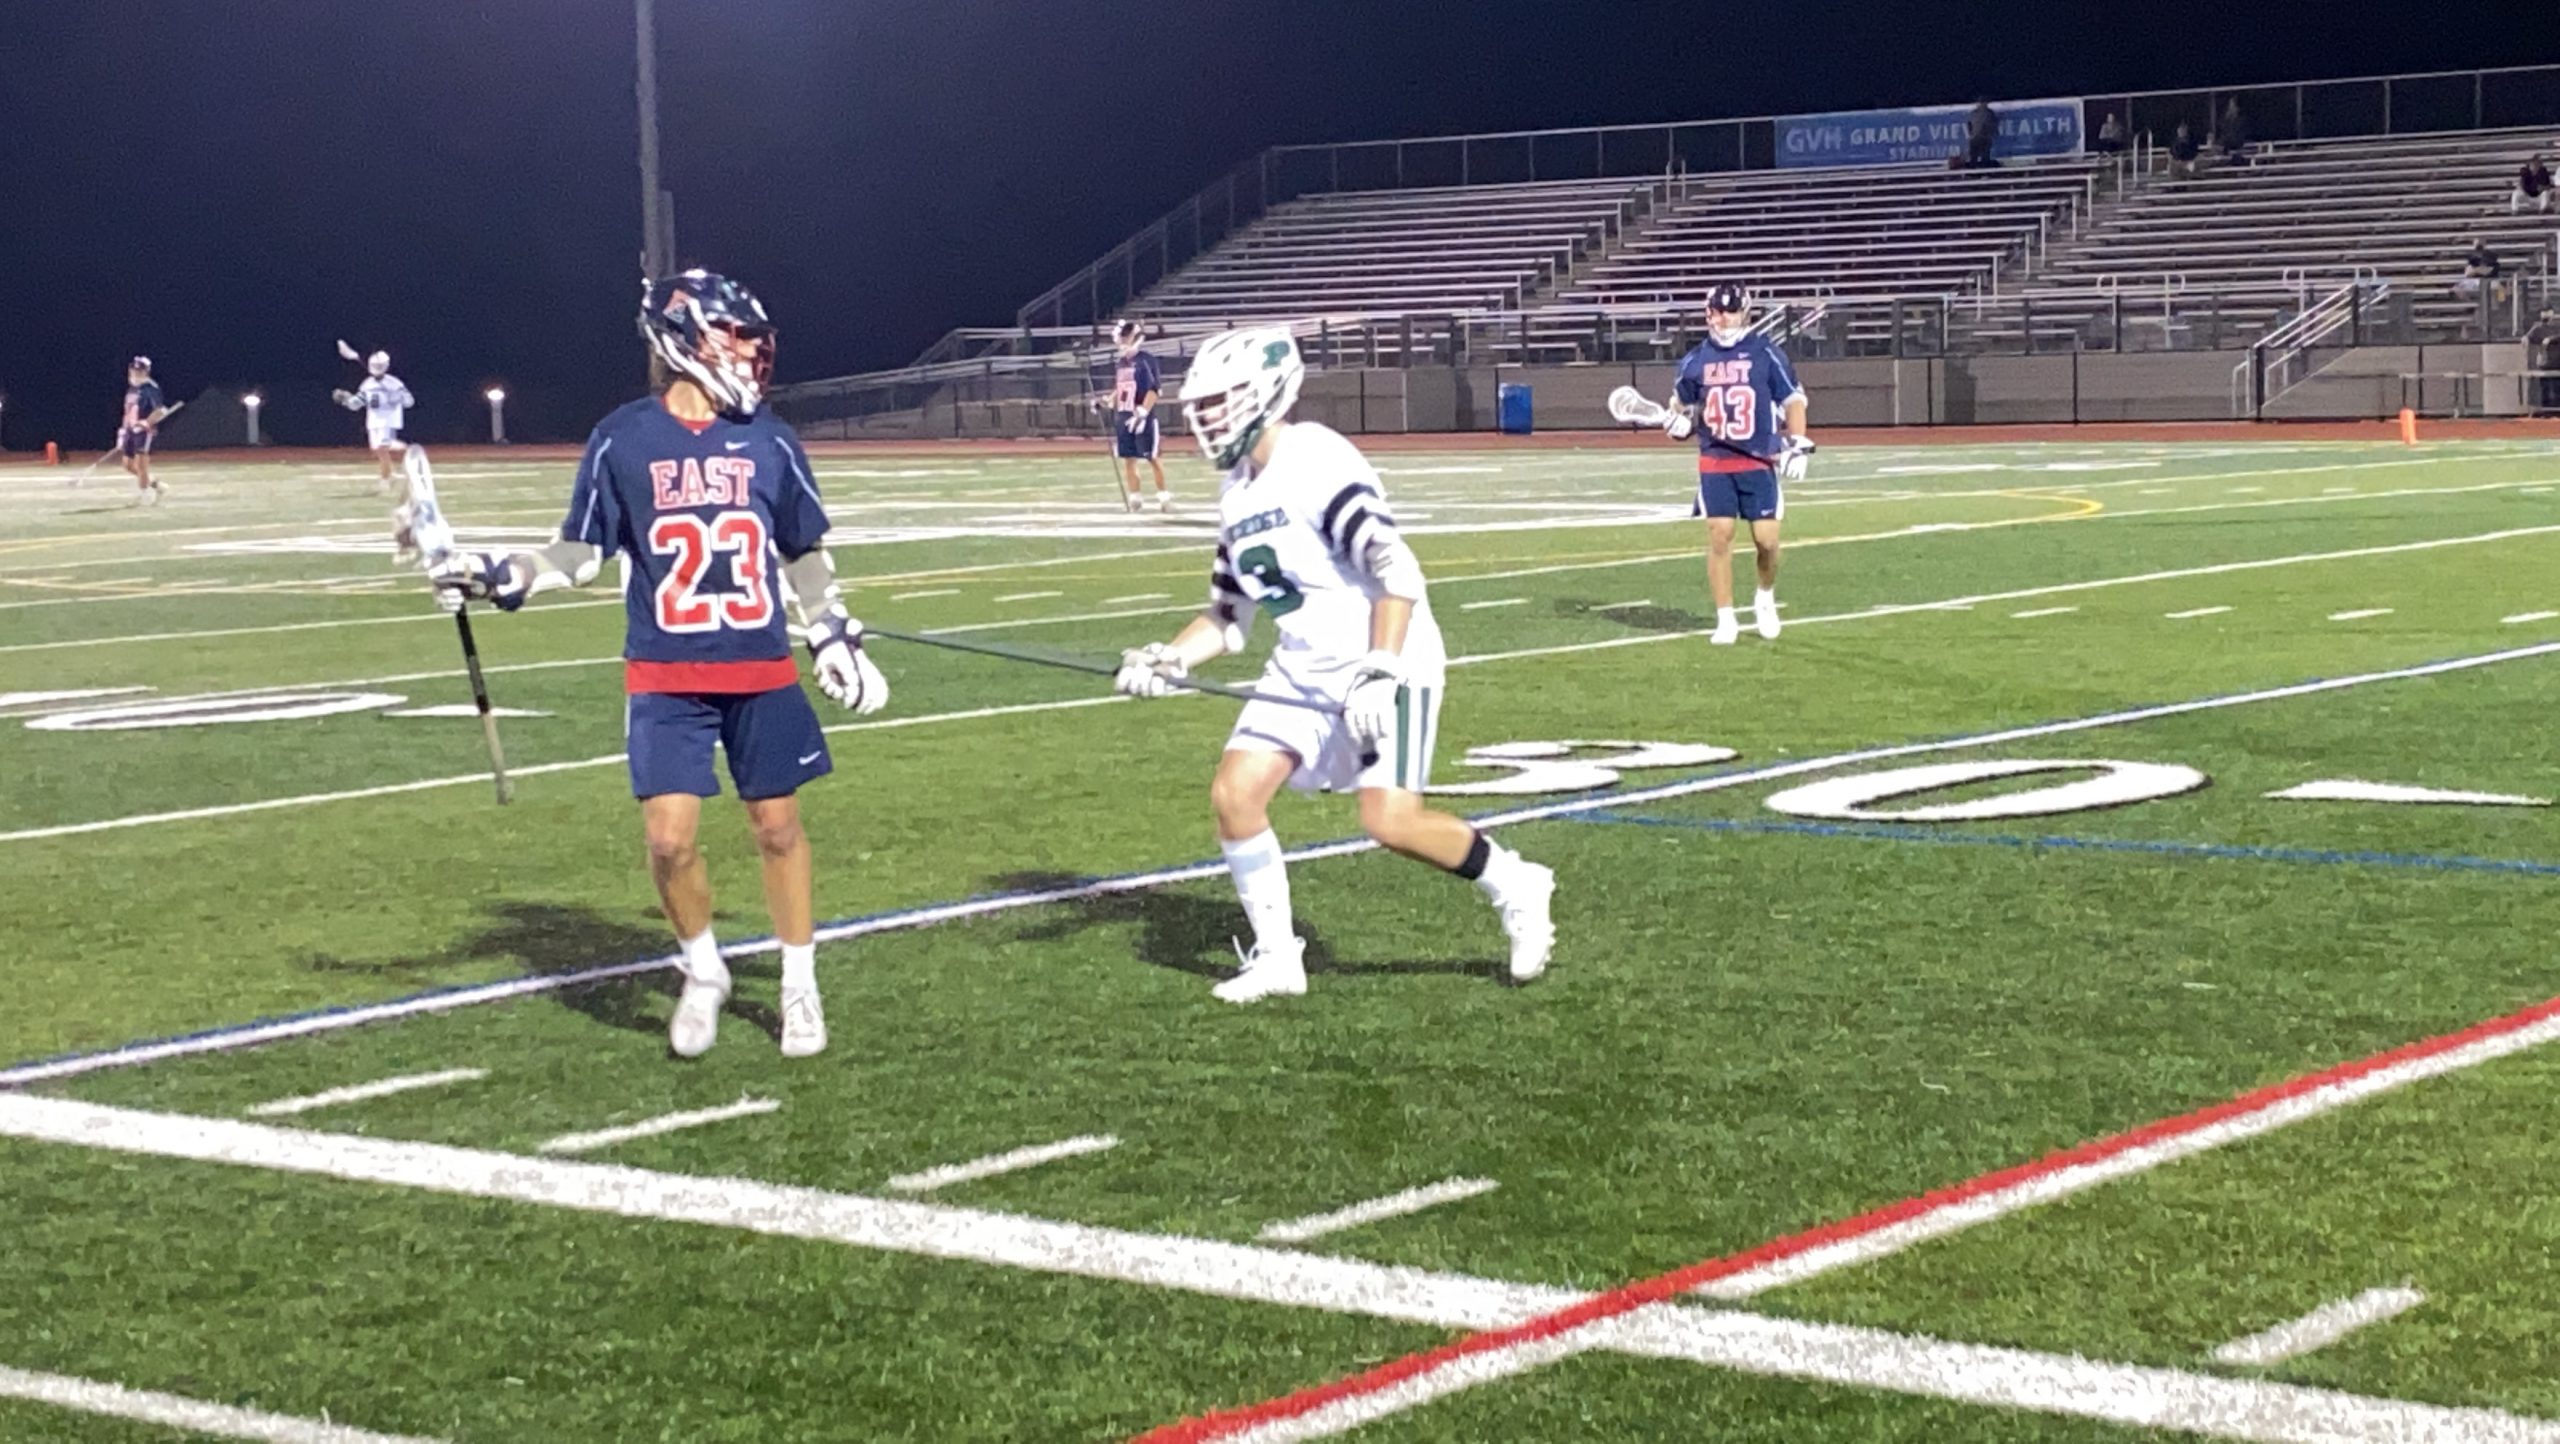 CB East rallies past Pennridge to stay undefeated in SOL National – PA Prep Live